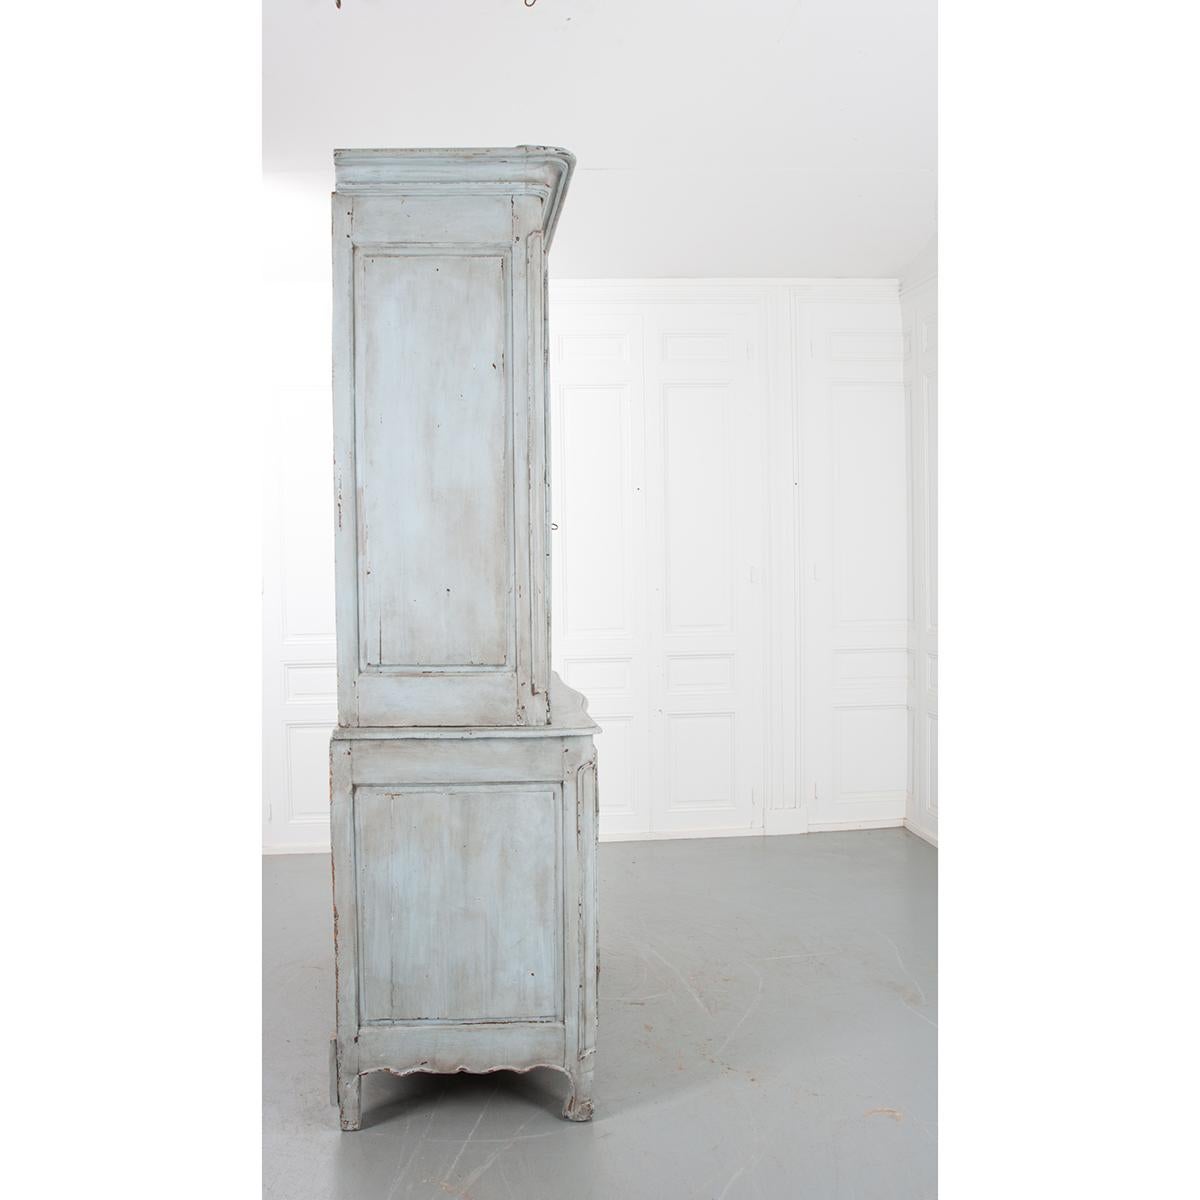 This large piece is a French 18th century buffet a deux corps. It has its original, worn, soft blue/gray painted finish. Incredible patina. The base is 40-?”H. It has one stationary shelf on the bottom that is 22-¾” D. The base has one key and a